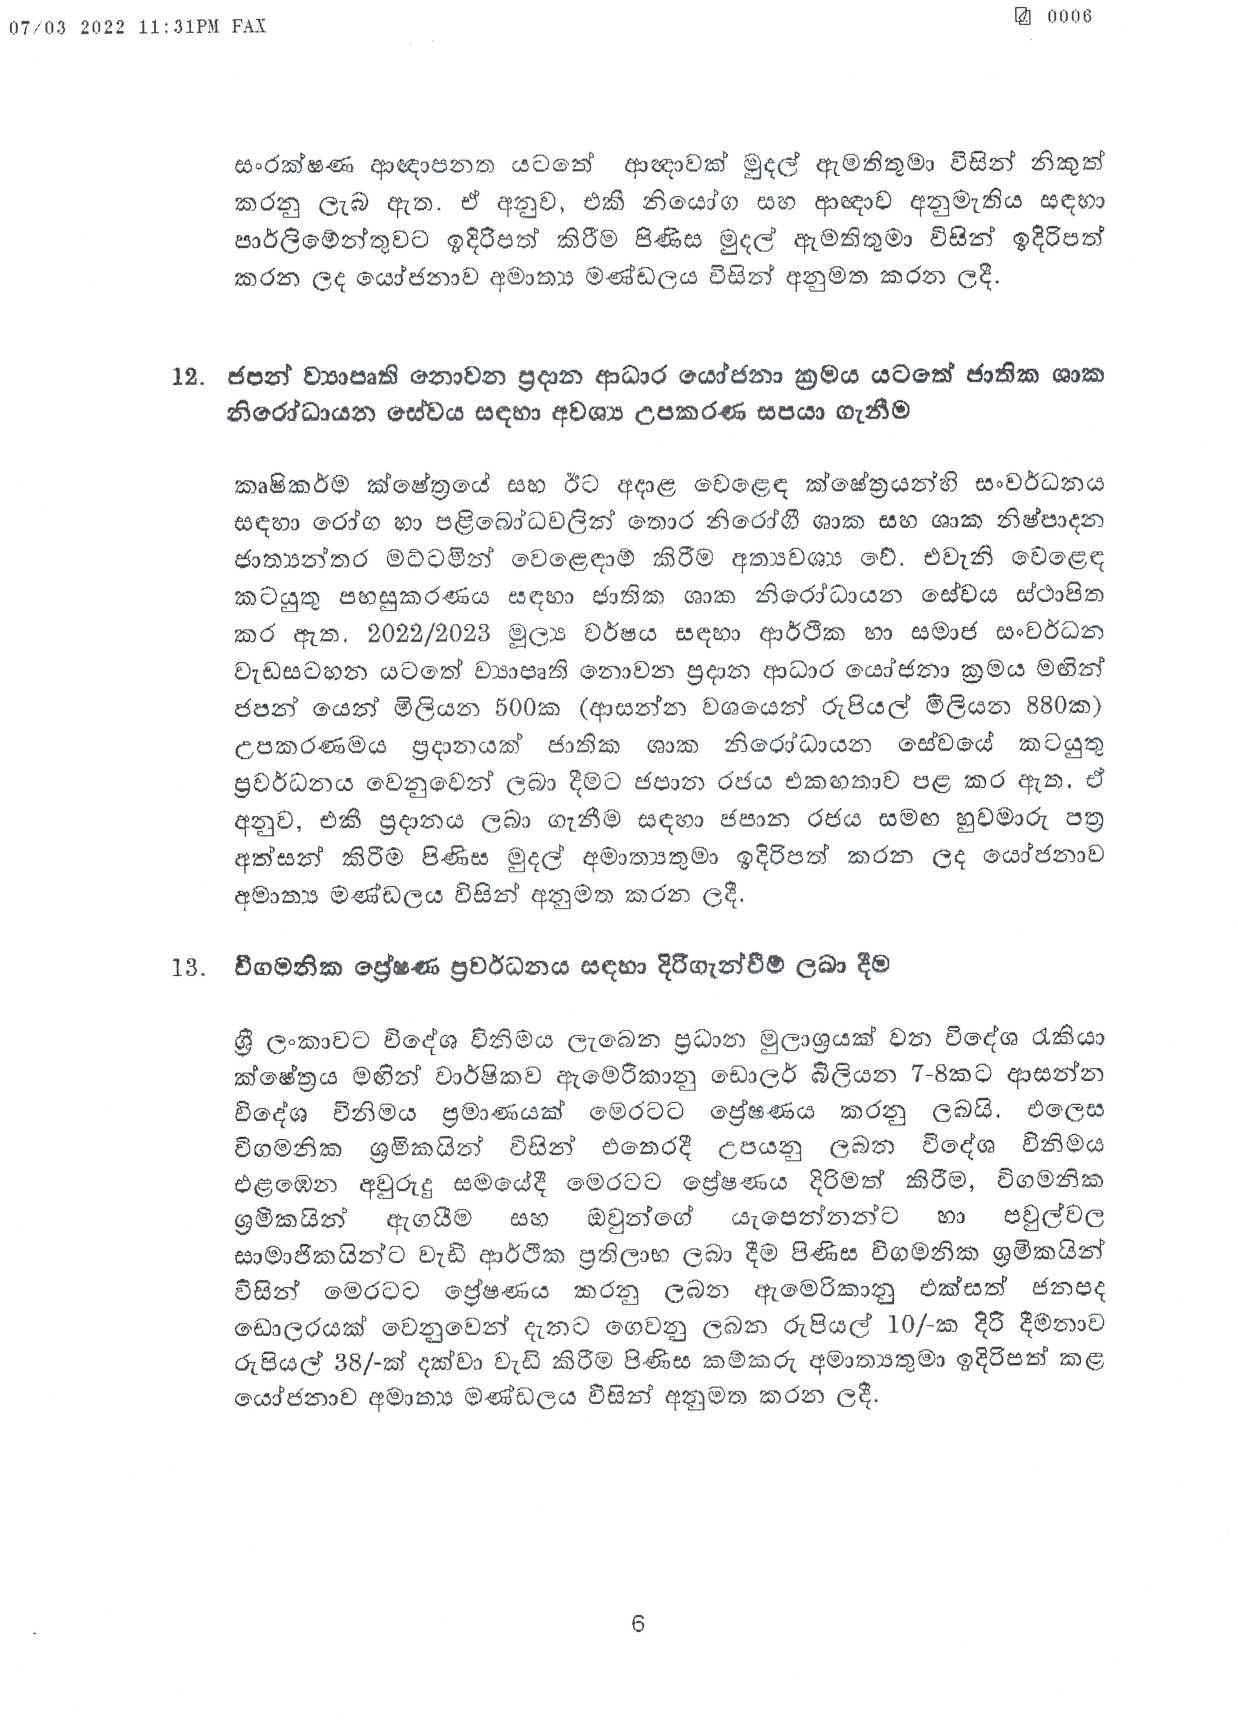 Cabinet Decision on 07.03.2022 page 006